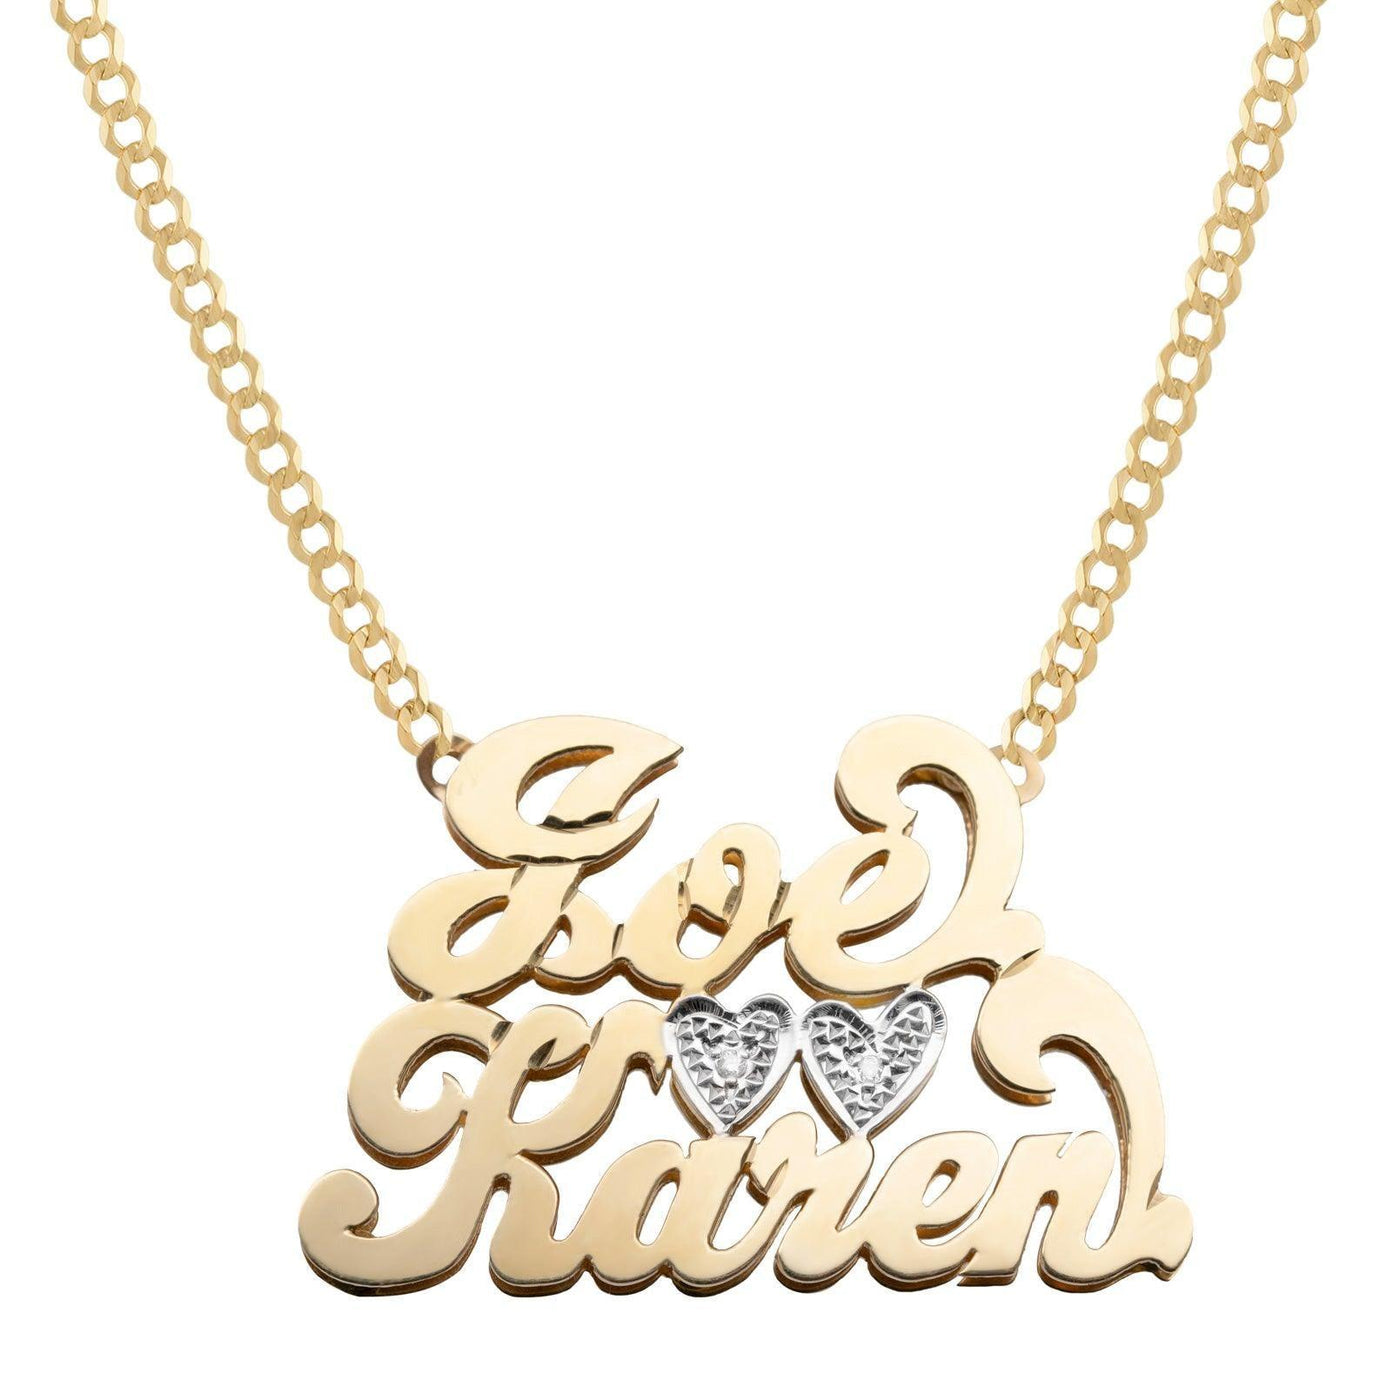 Ladies Diamond & Script Name Plate Hearts Necklace 14K Gold - Style 39 - bayamjewelry